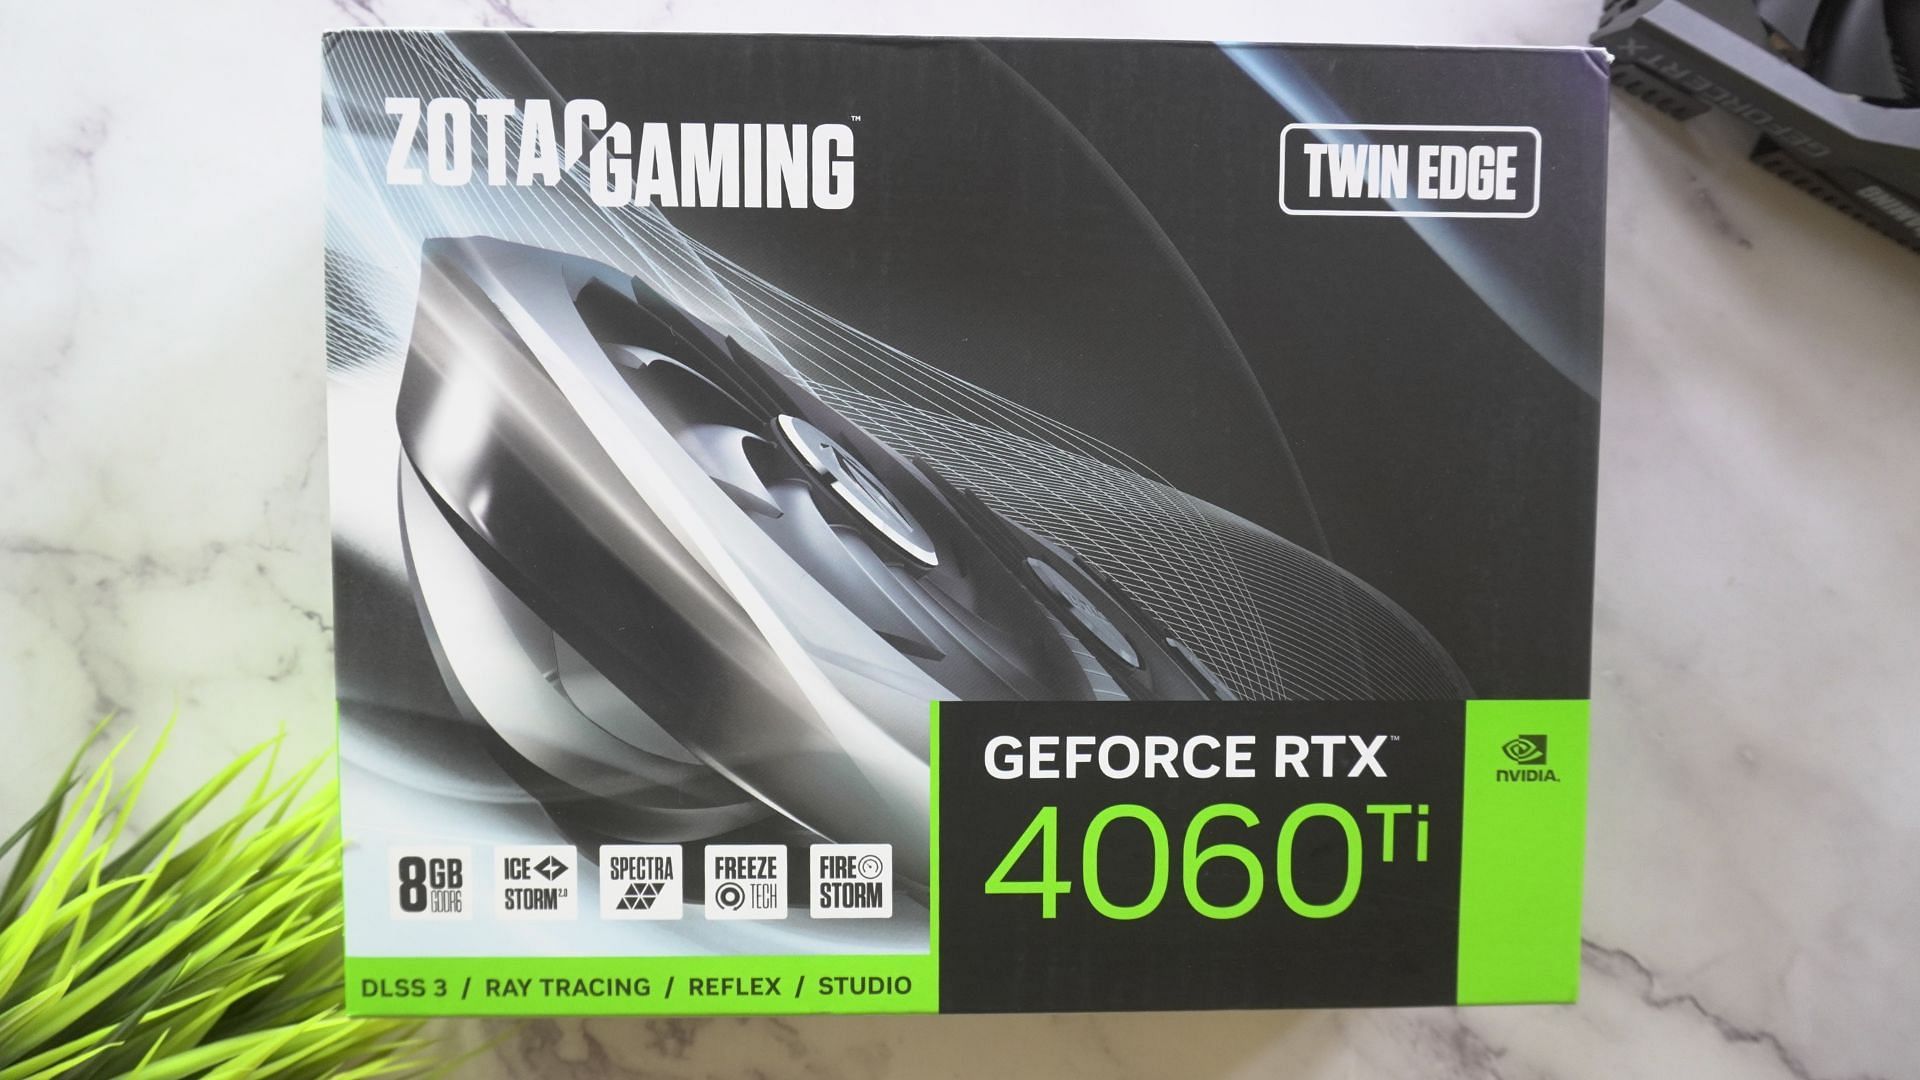 The Geforce RTX 4060 Ti is Nvidia